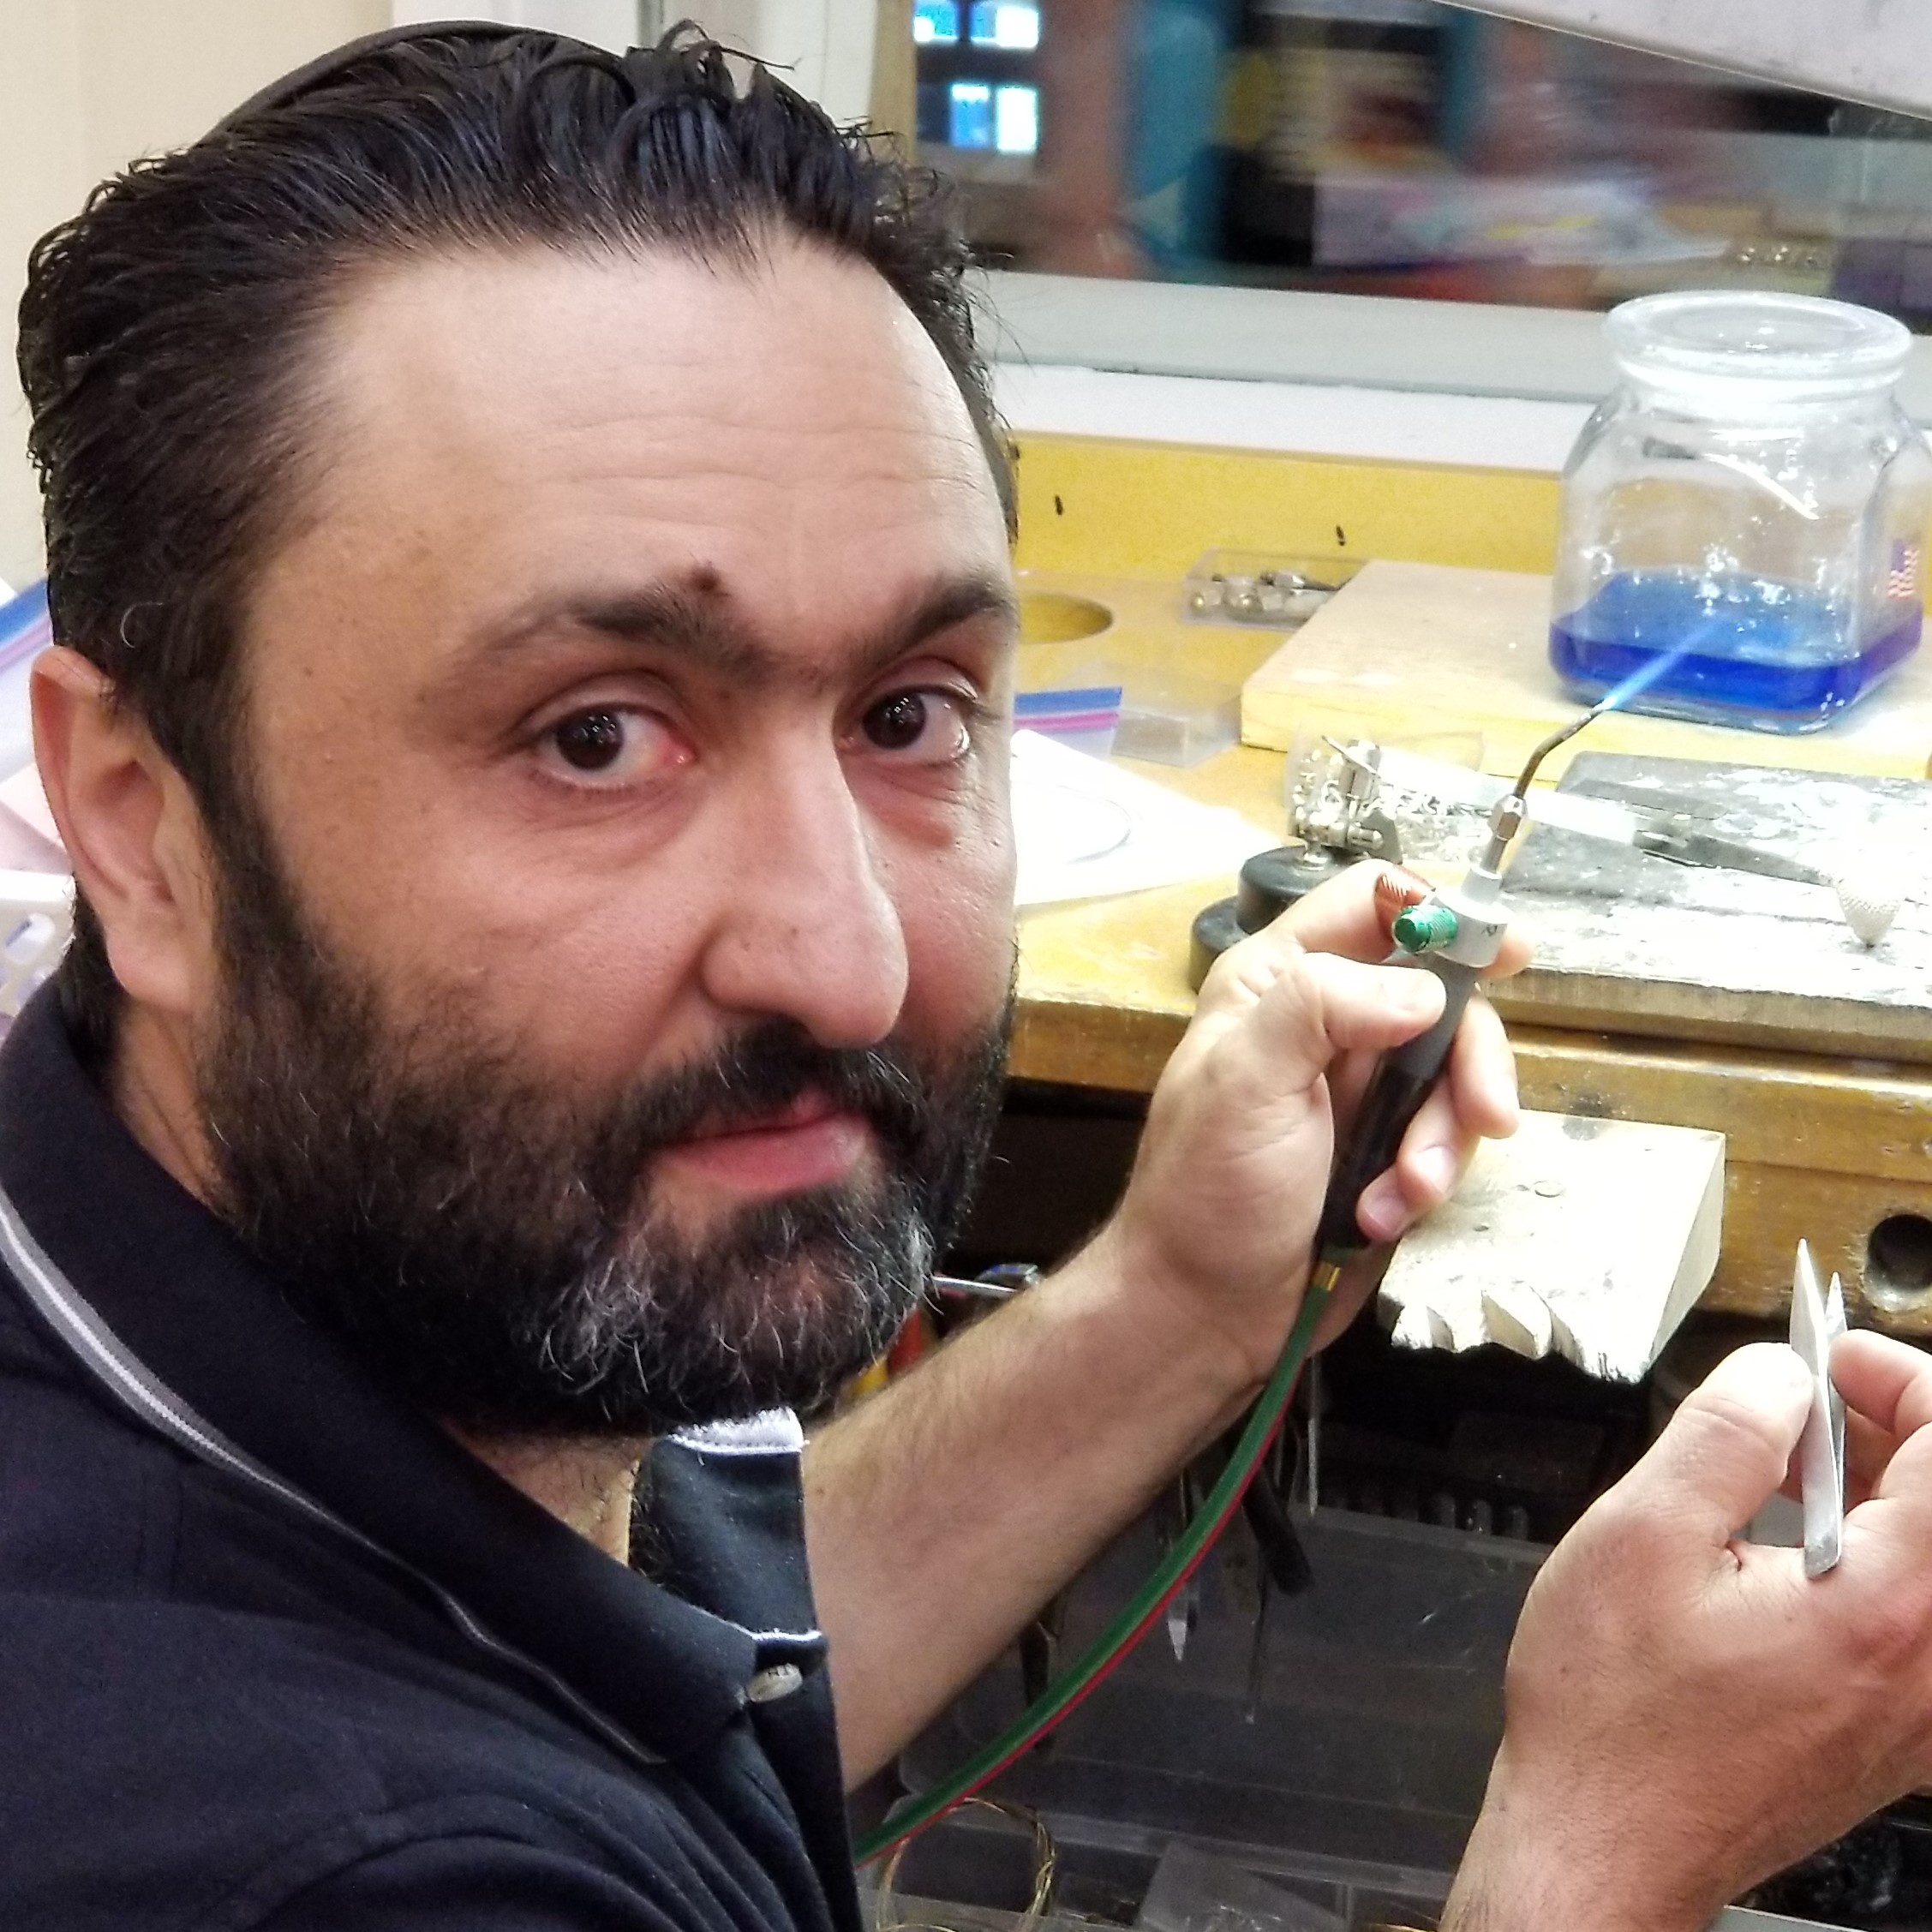 Michael Gadelov holds a jewelry torch and a pair of tweezers to complete a job at his Jewelers Bench